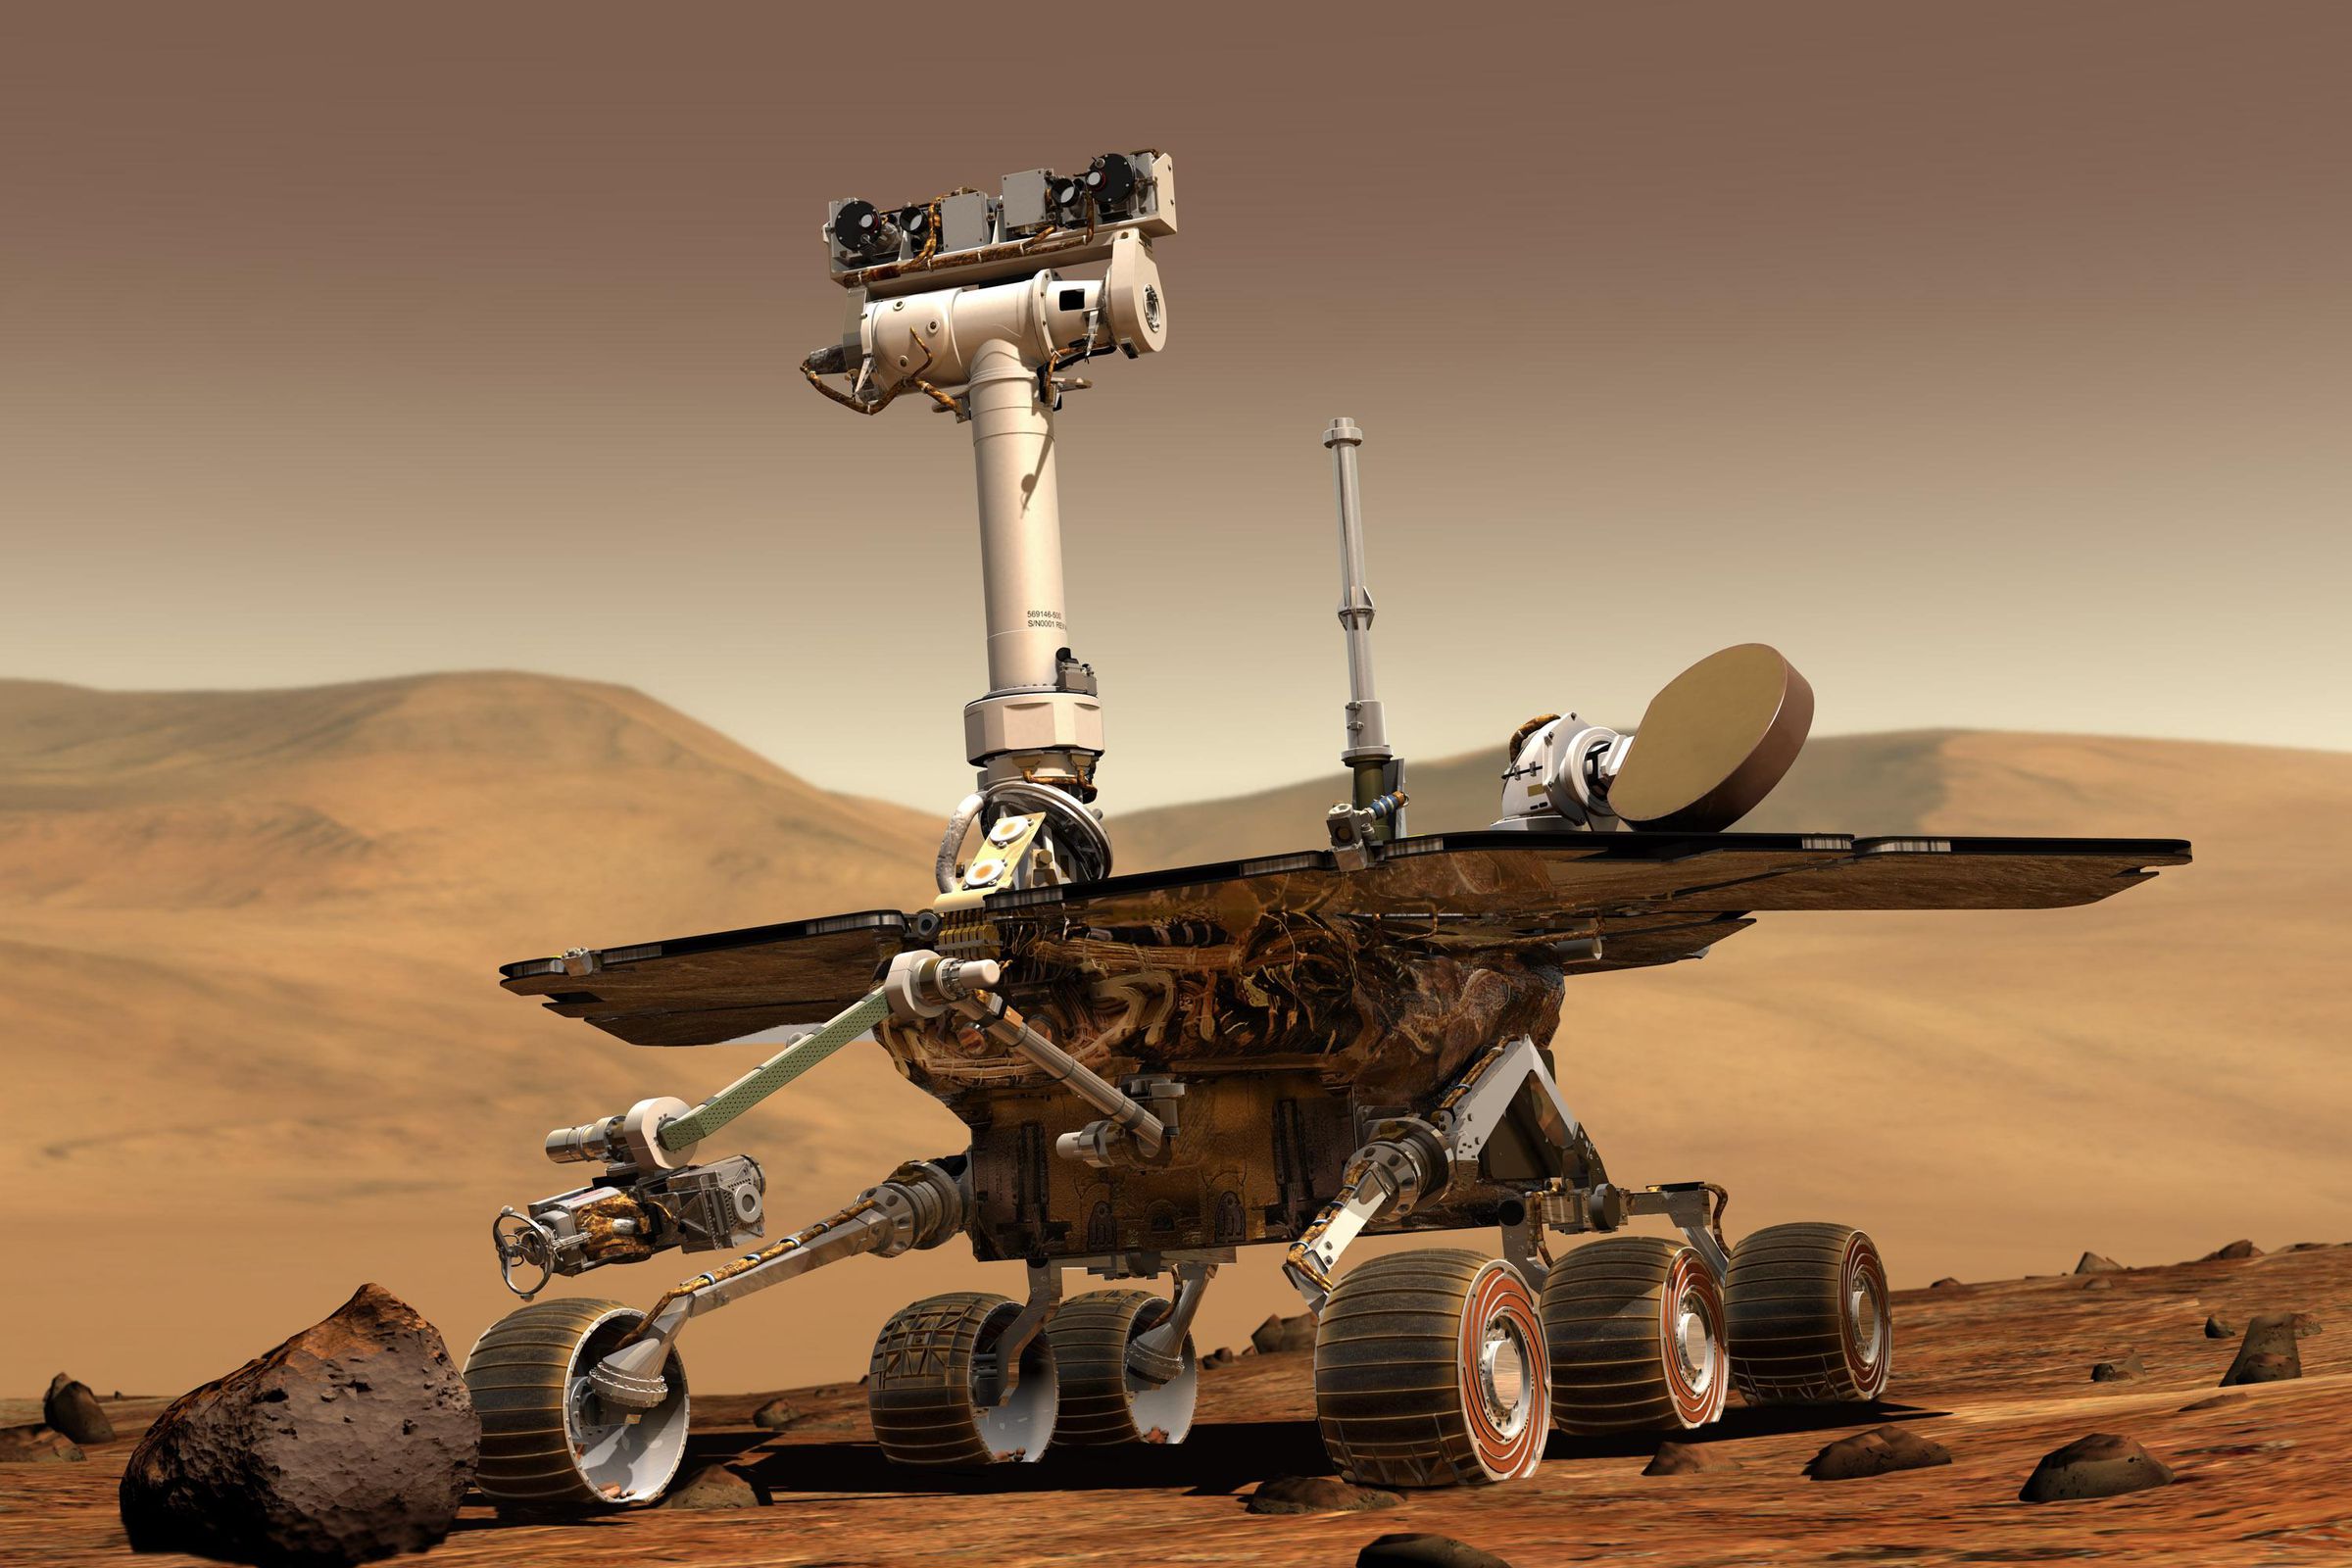 A rendering of NASA’s Opportunity rover